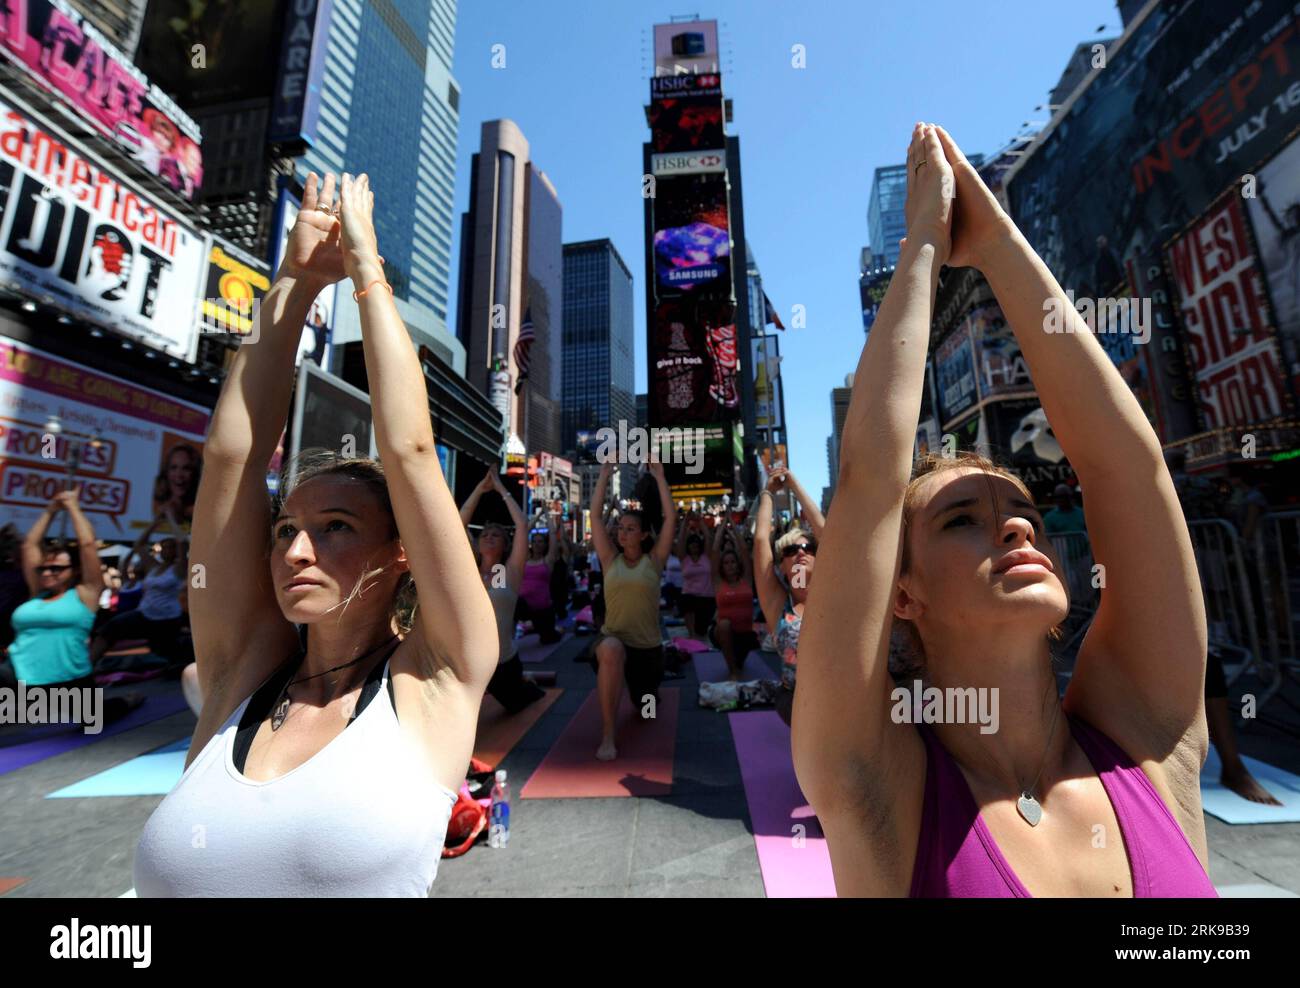 Bildnummer: 54158707  Datum: 21.06.2010  Copyright: imago/Xinhua (100621) -- NEW YORK, June 21, 2010 (Xinhua) -- Yoga enthusiasts practise yoga on the morning of the summer solstice at Times Square in New York, the United States, June 21, 2010. Thousands of yoga enthusiasts got together during the eighth annual Solstice in Times Square event to celebrate the longest day of the year. (Xinhua/Shen Hong) (zw) (22)U.S.-NEW YORK-TIMES SQUARE-YOGA PUBLICATIONxNOTxINxCHN Gesellschaft Freizeitsport Yoga Sommersonnenwende kurios premiumd xint kbdig xsp 2010 quer  o0 Sonnenwende, Sonnwendfeier    Bildnu Stock Photo